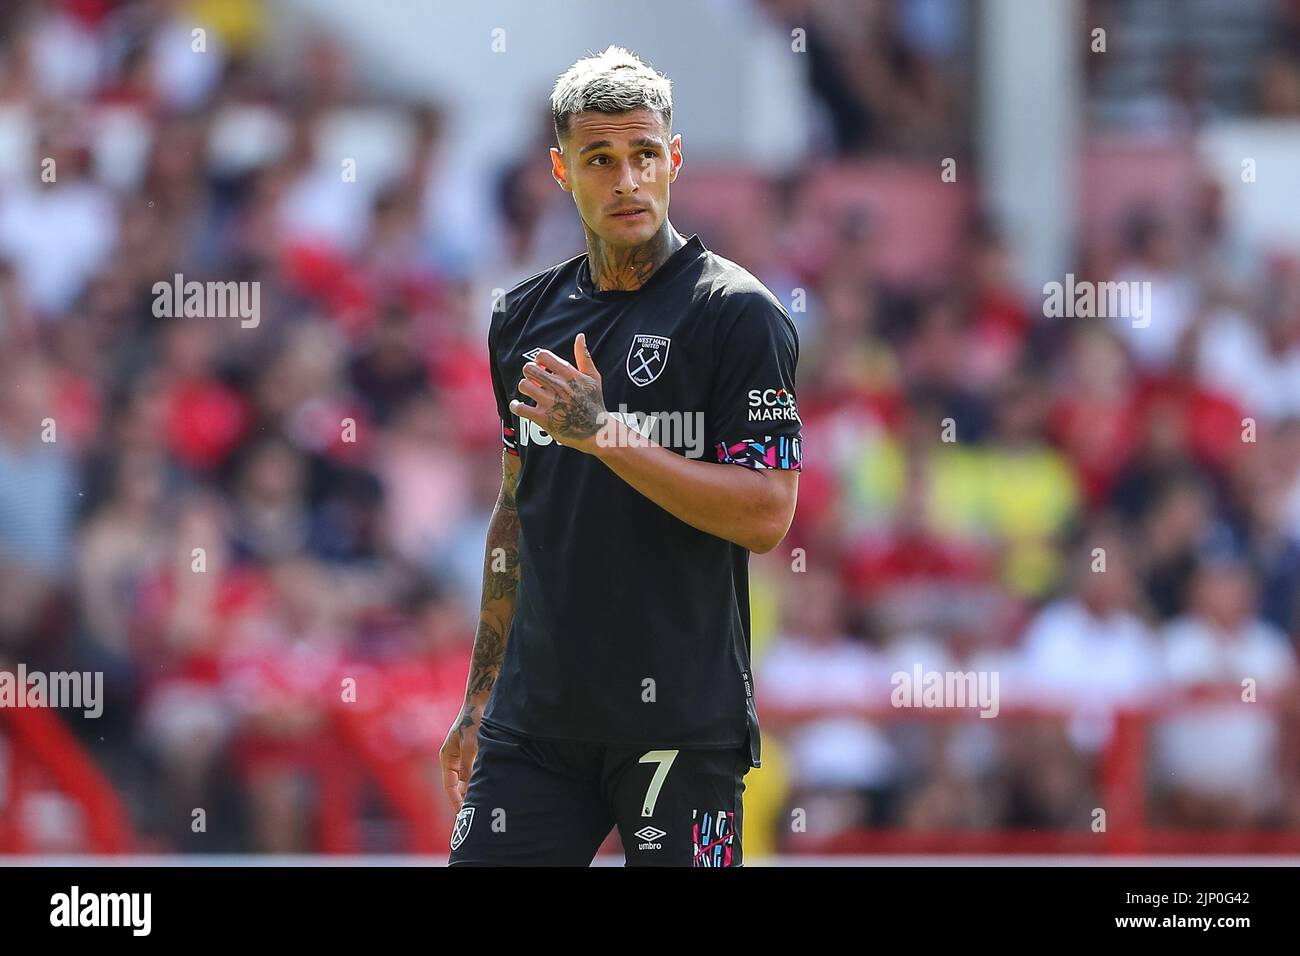 Gianluca Scamacca #7 of West Ham United during the game Stock Photo